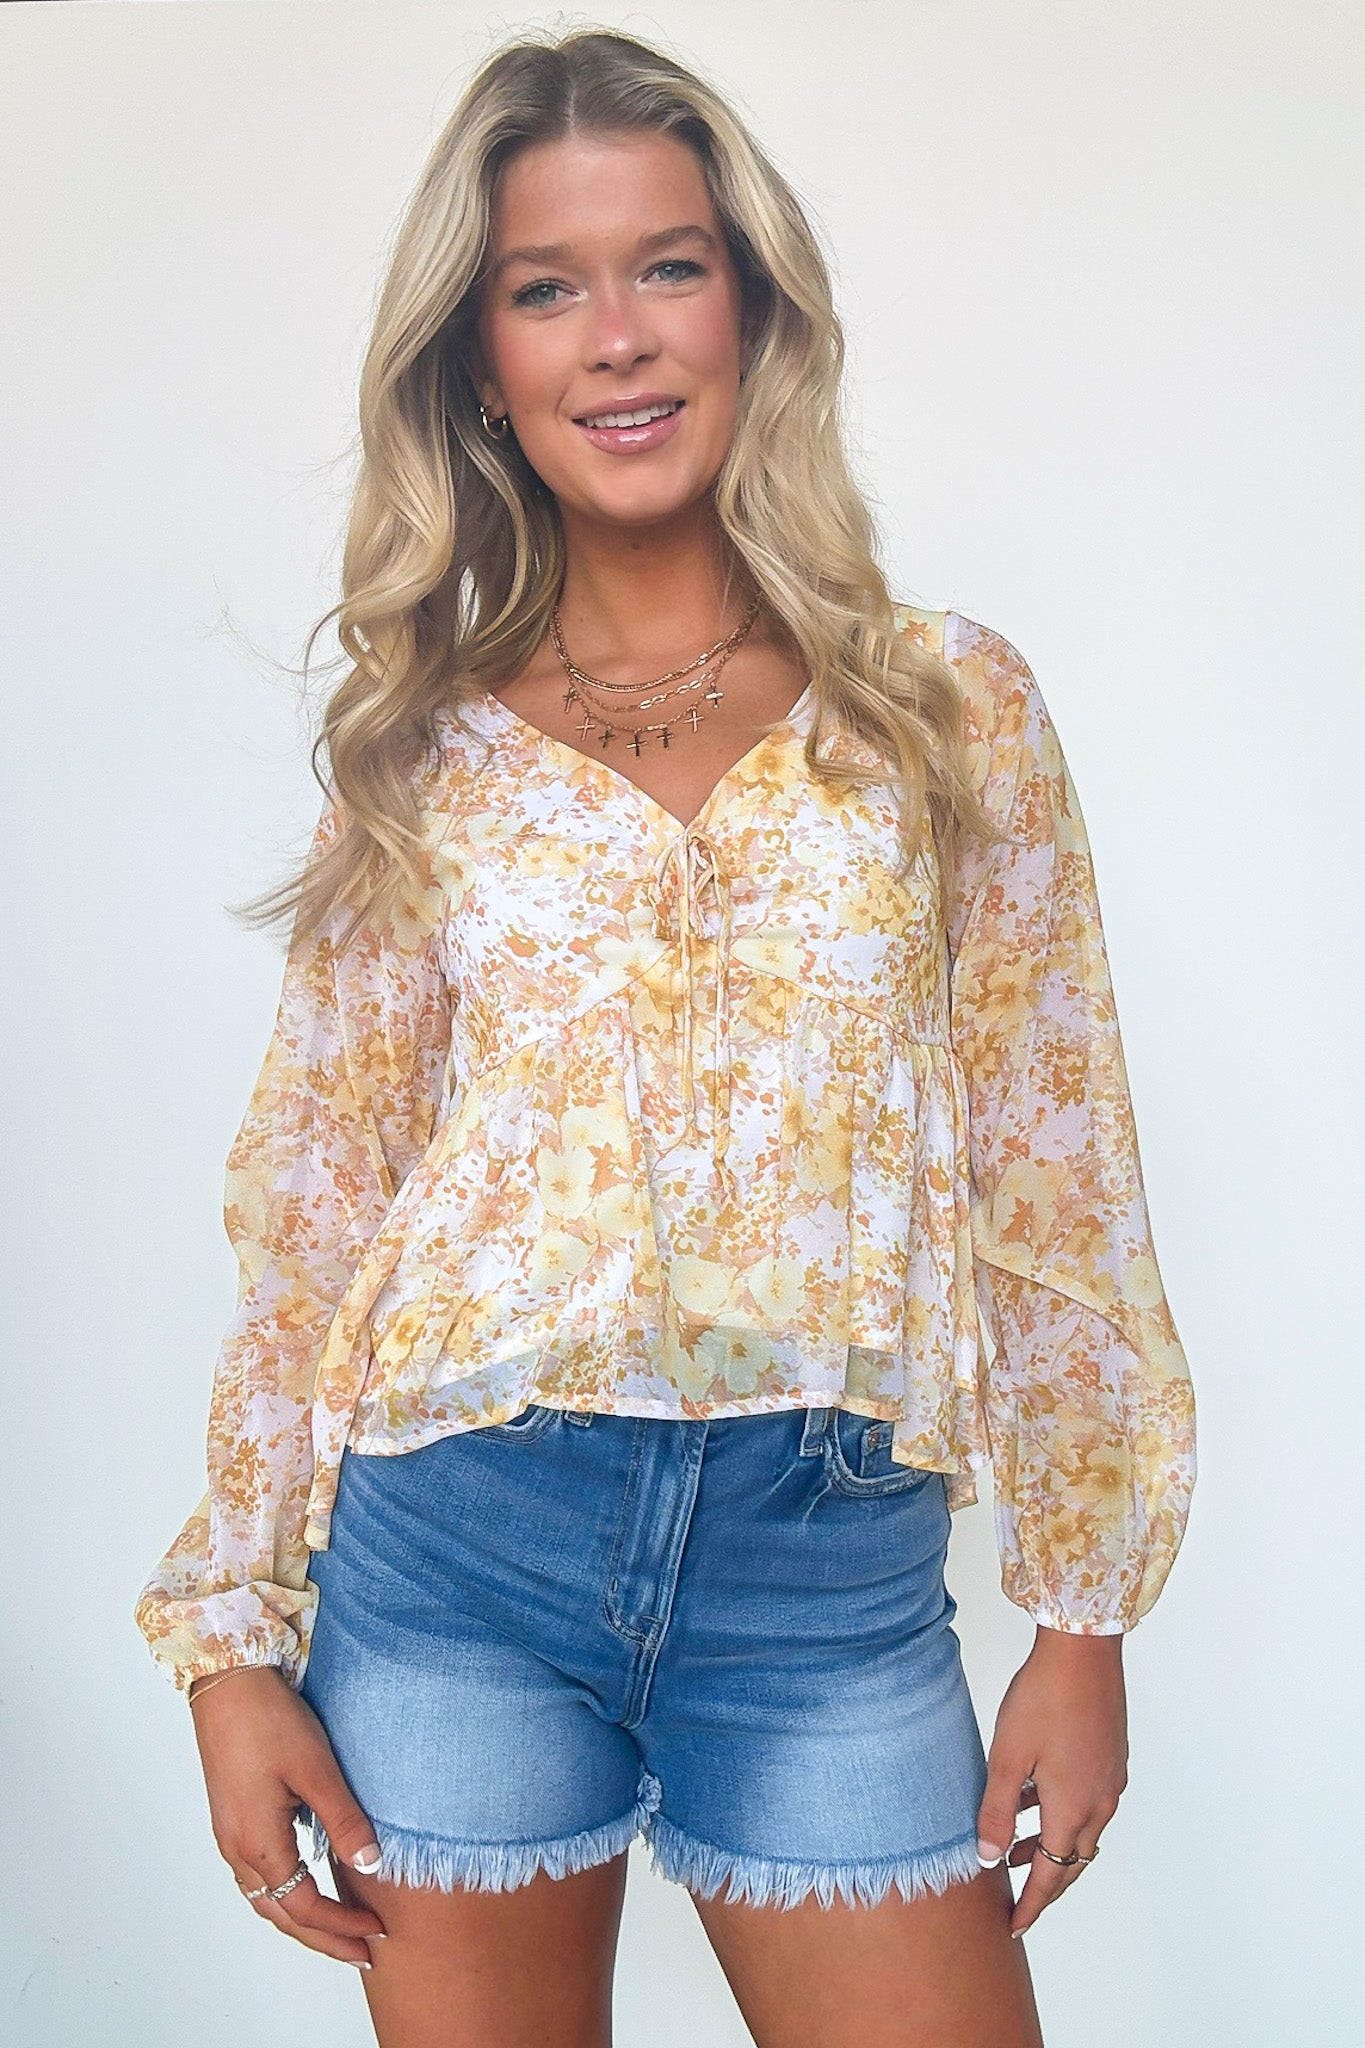  Elegant Ease Floral Print Swing Top - Madison and Mallory